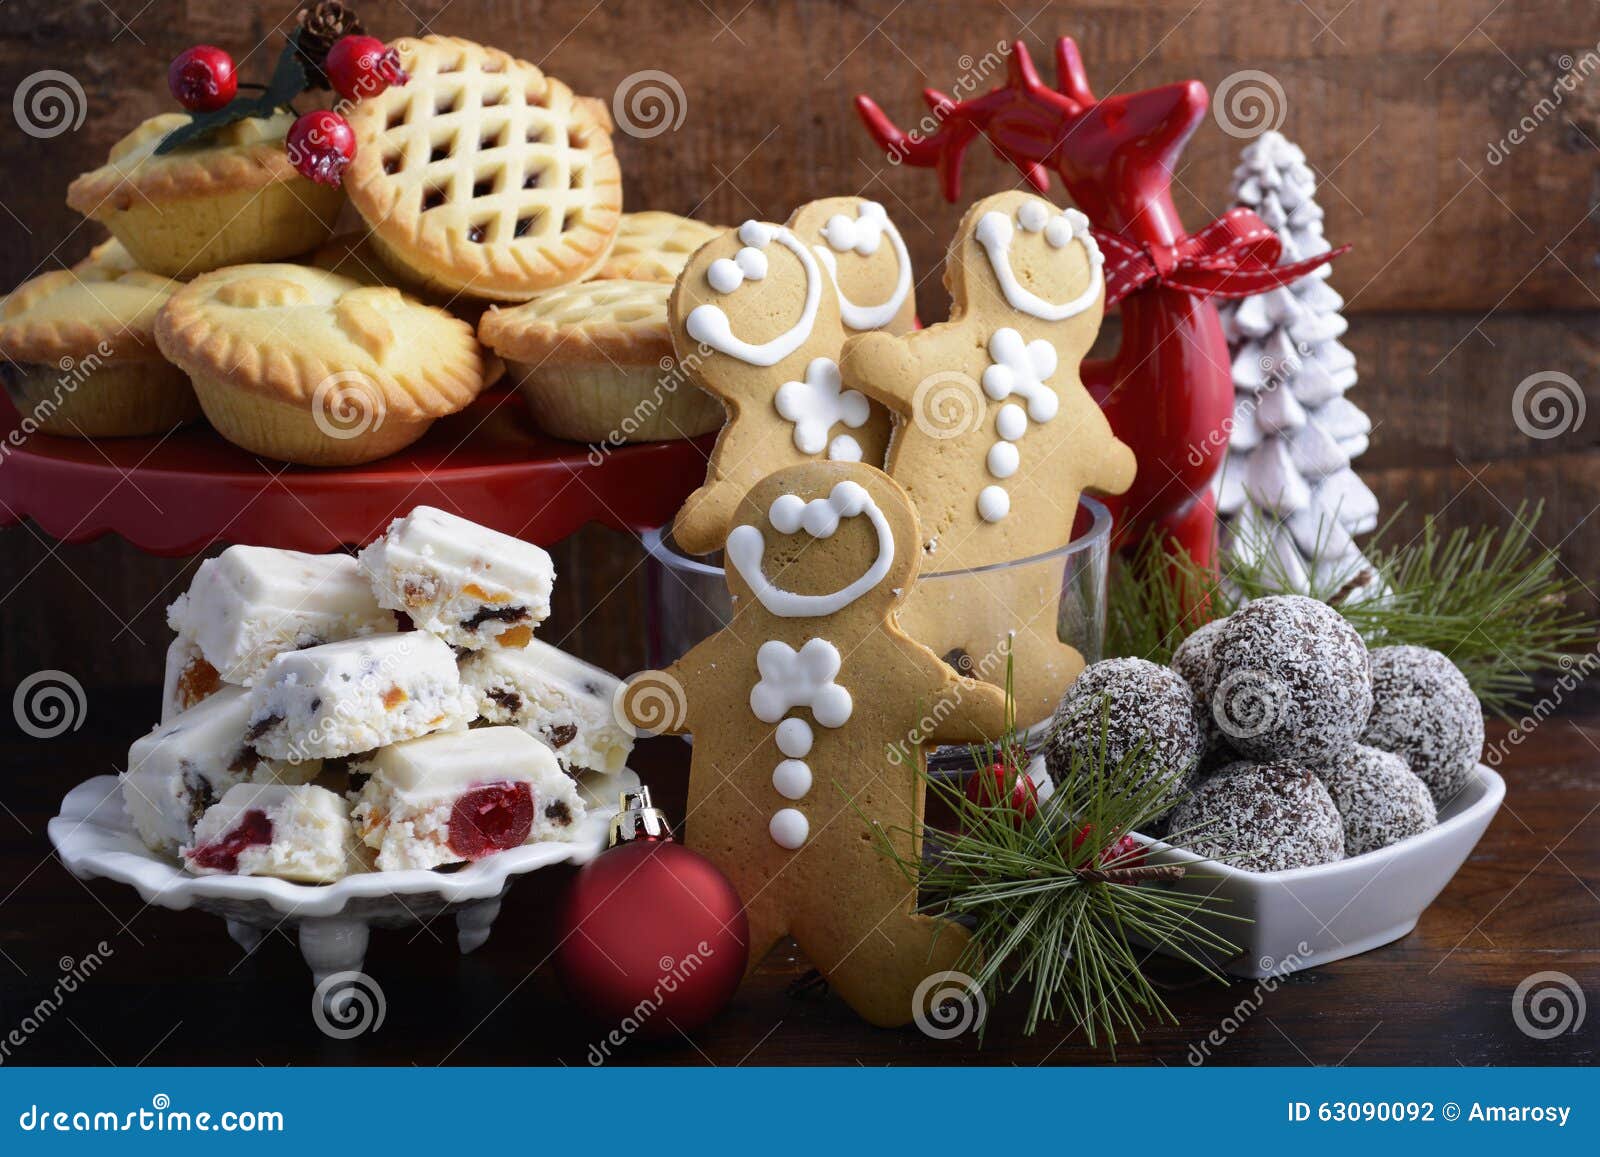 Set of festive food and decorations for christmas Vector Image